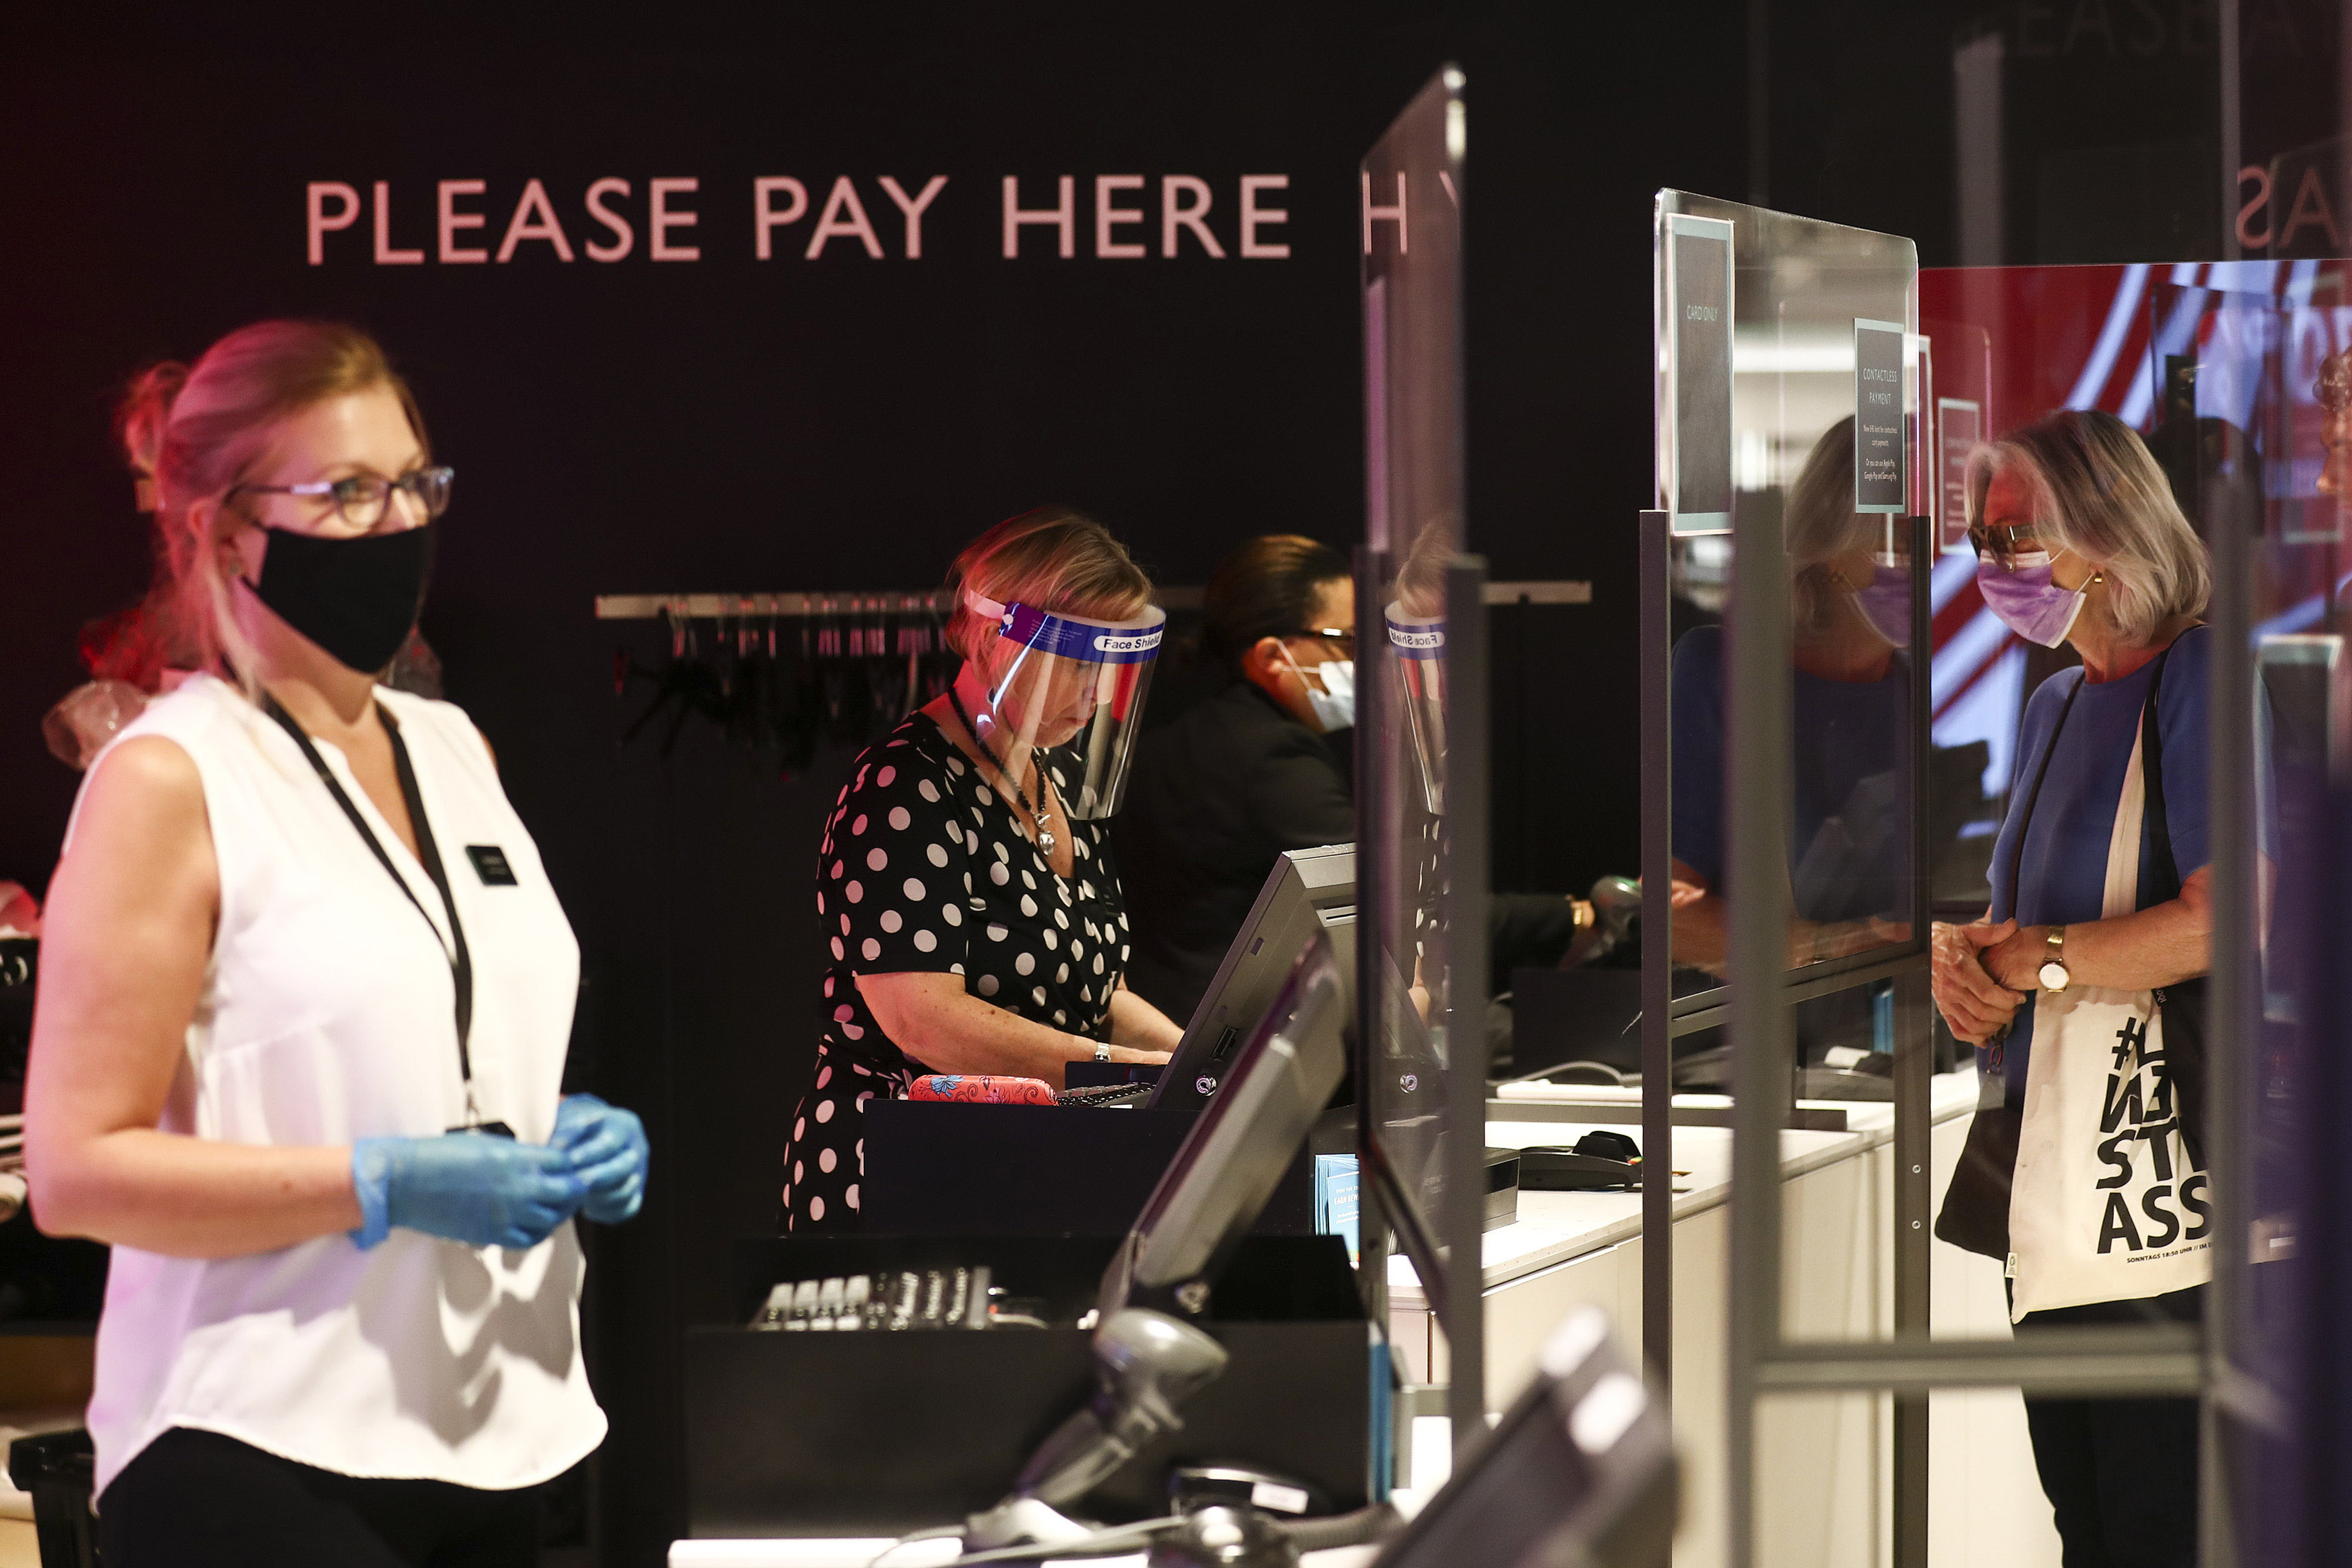 Employees serve customers on July 23 inside a John Lewis Partnership department store in London.